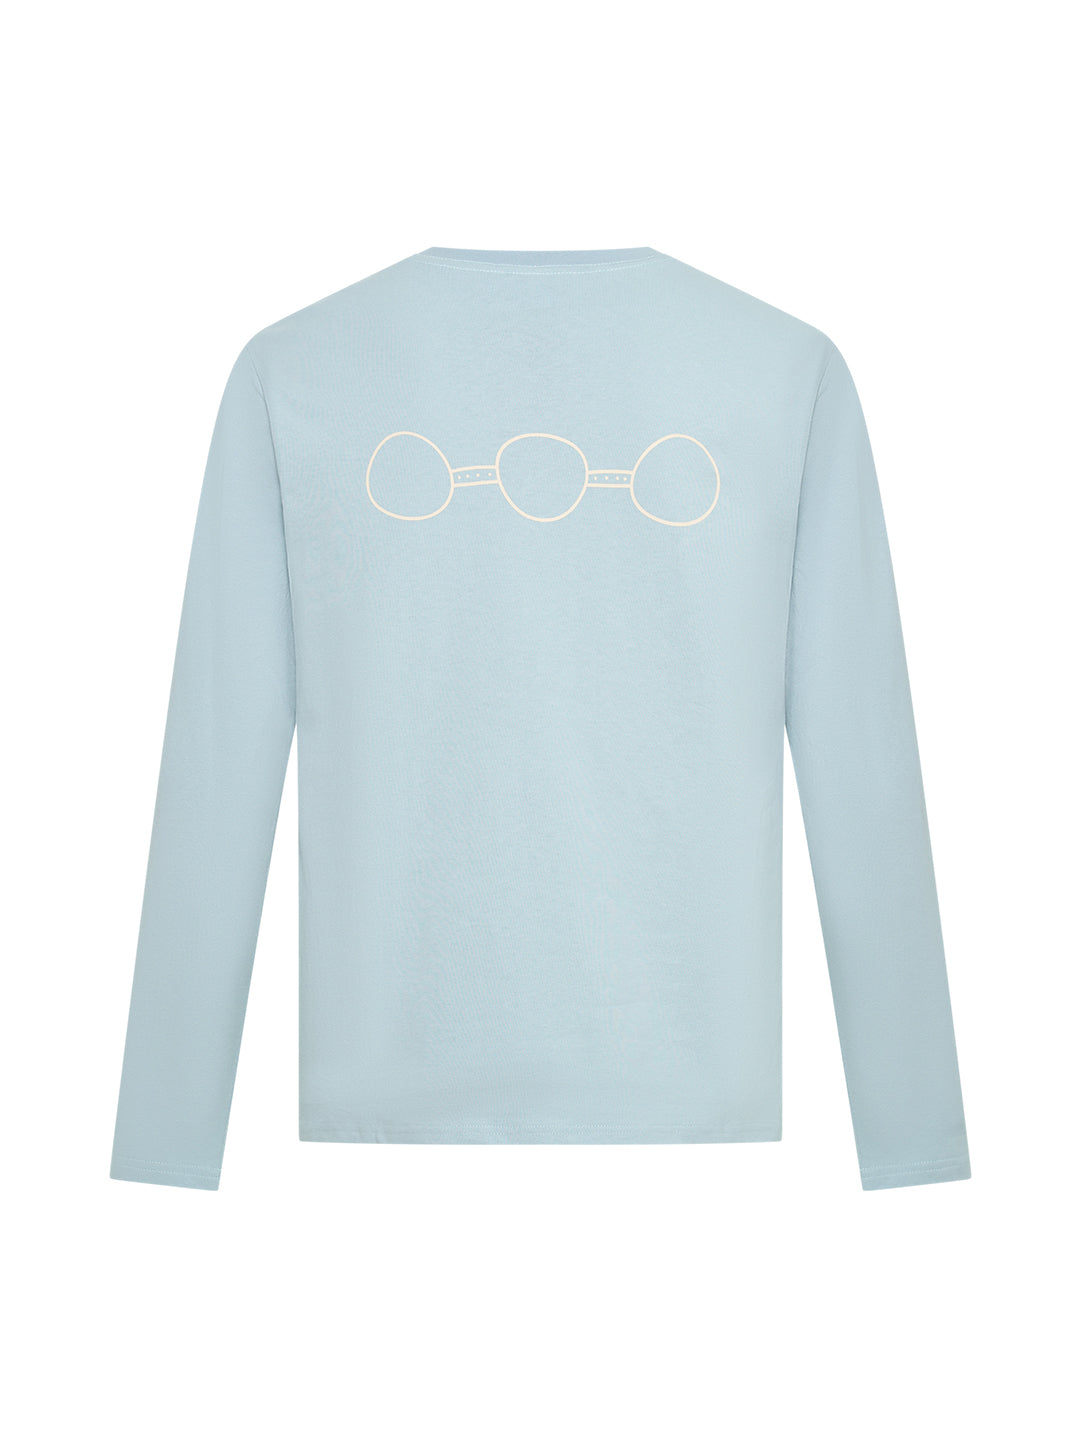 Connection Long Sleeve Tee - Sage